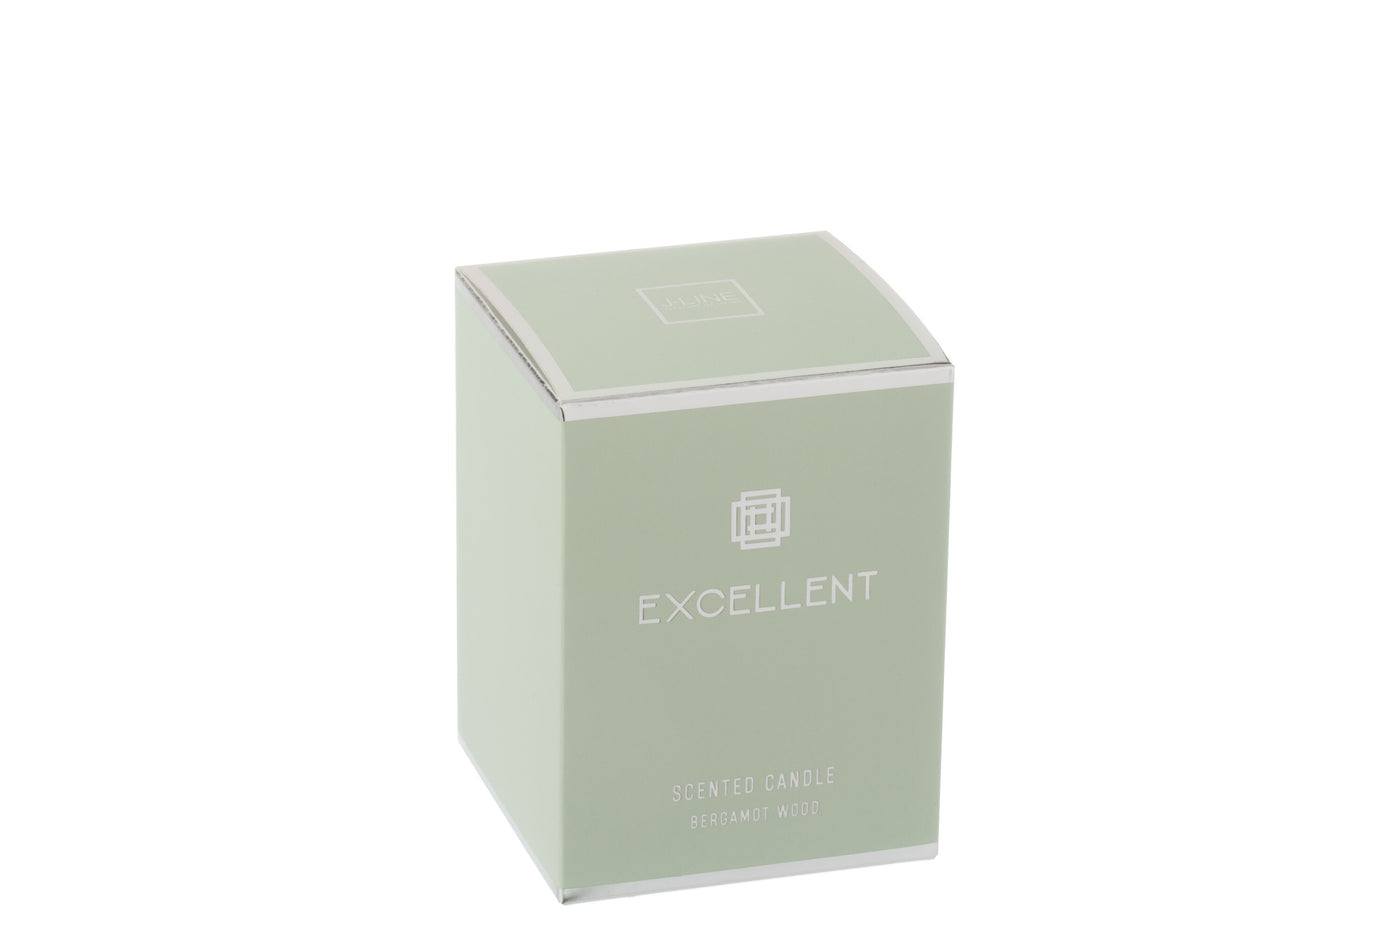 SCENTED CANDLE EXCELLENT GLASS MINT GREEN SMALL-50U